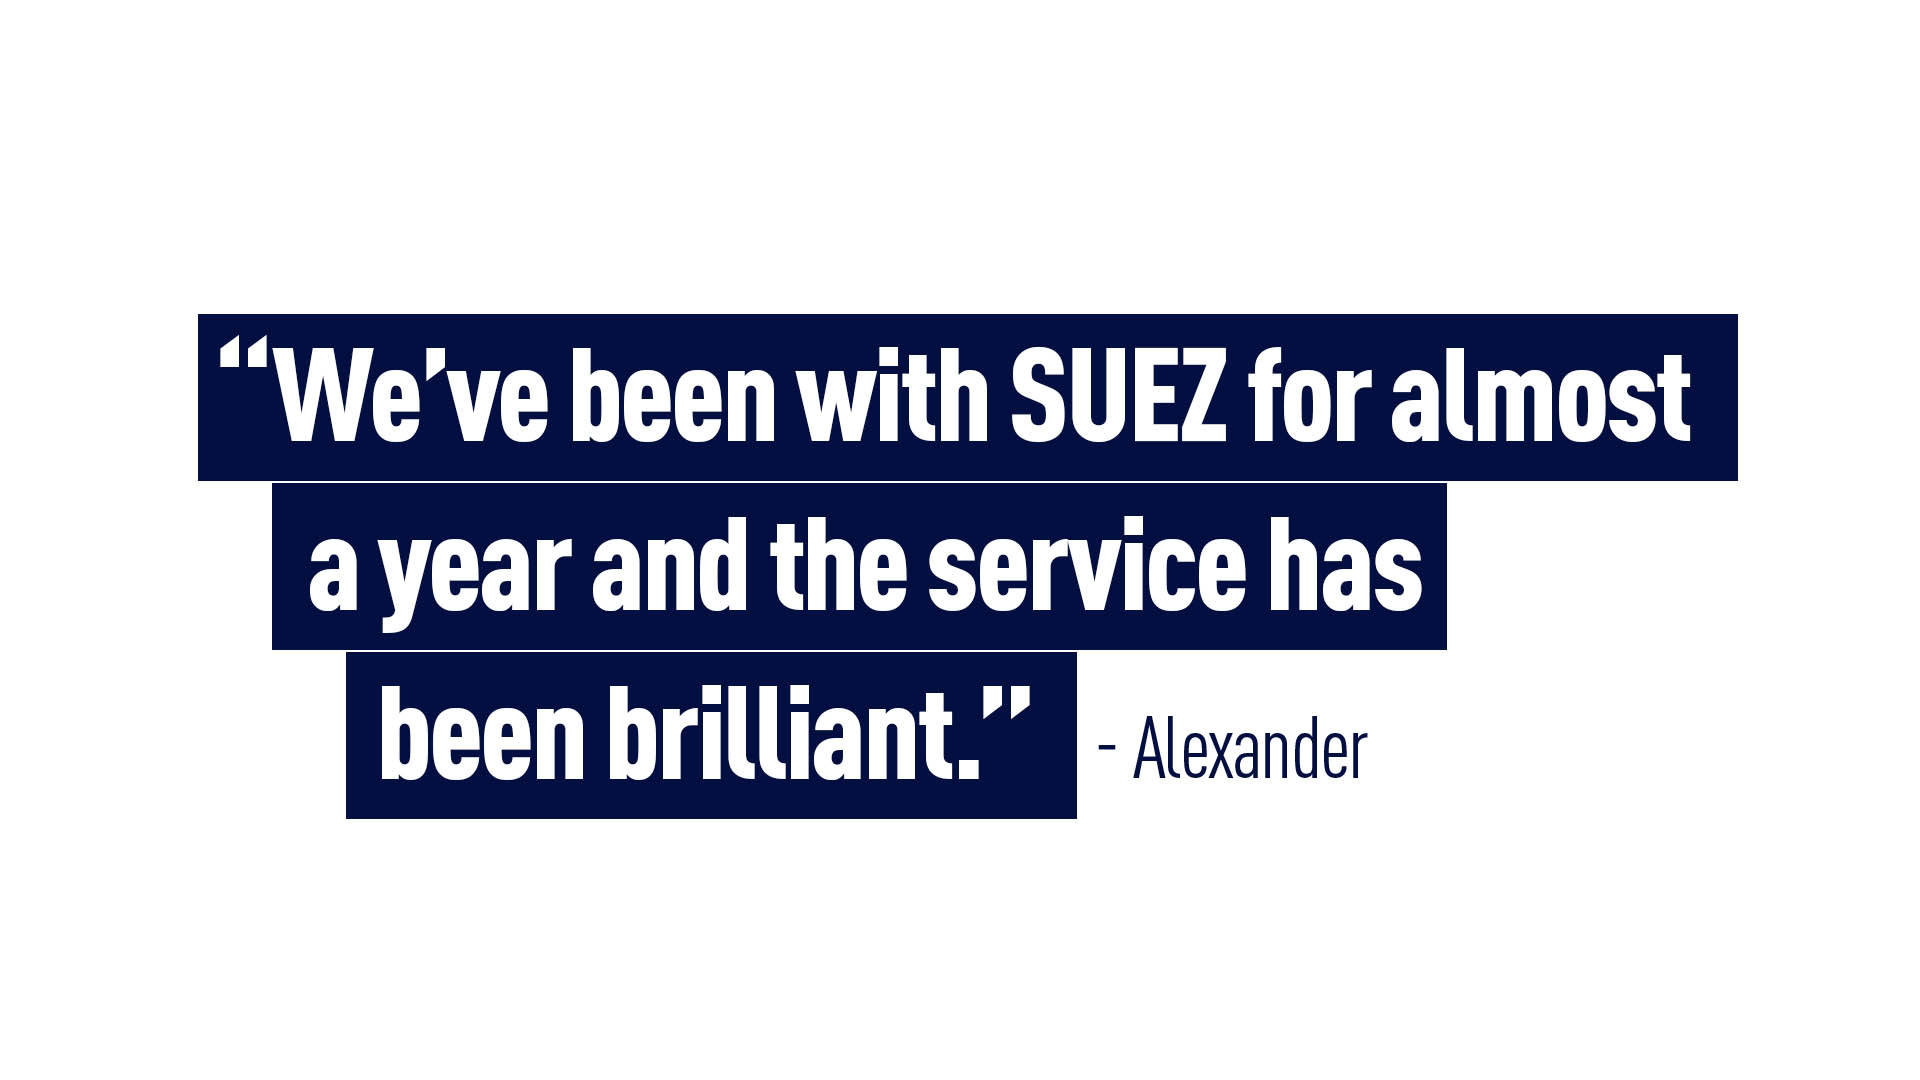 “We’ve been with SUEZ for almost a year and the service has been brilliant.” - Alexander